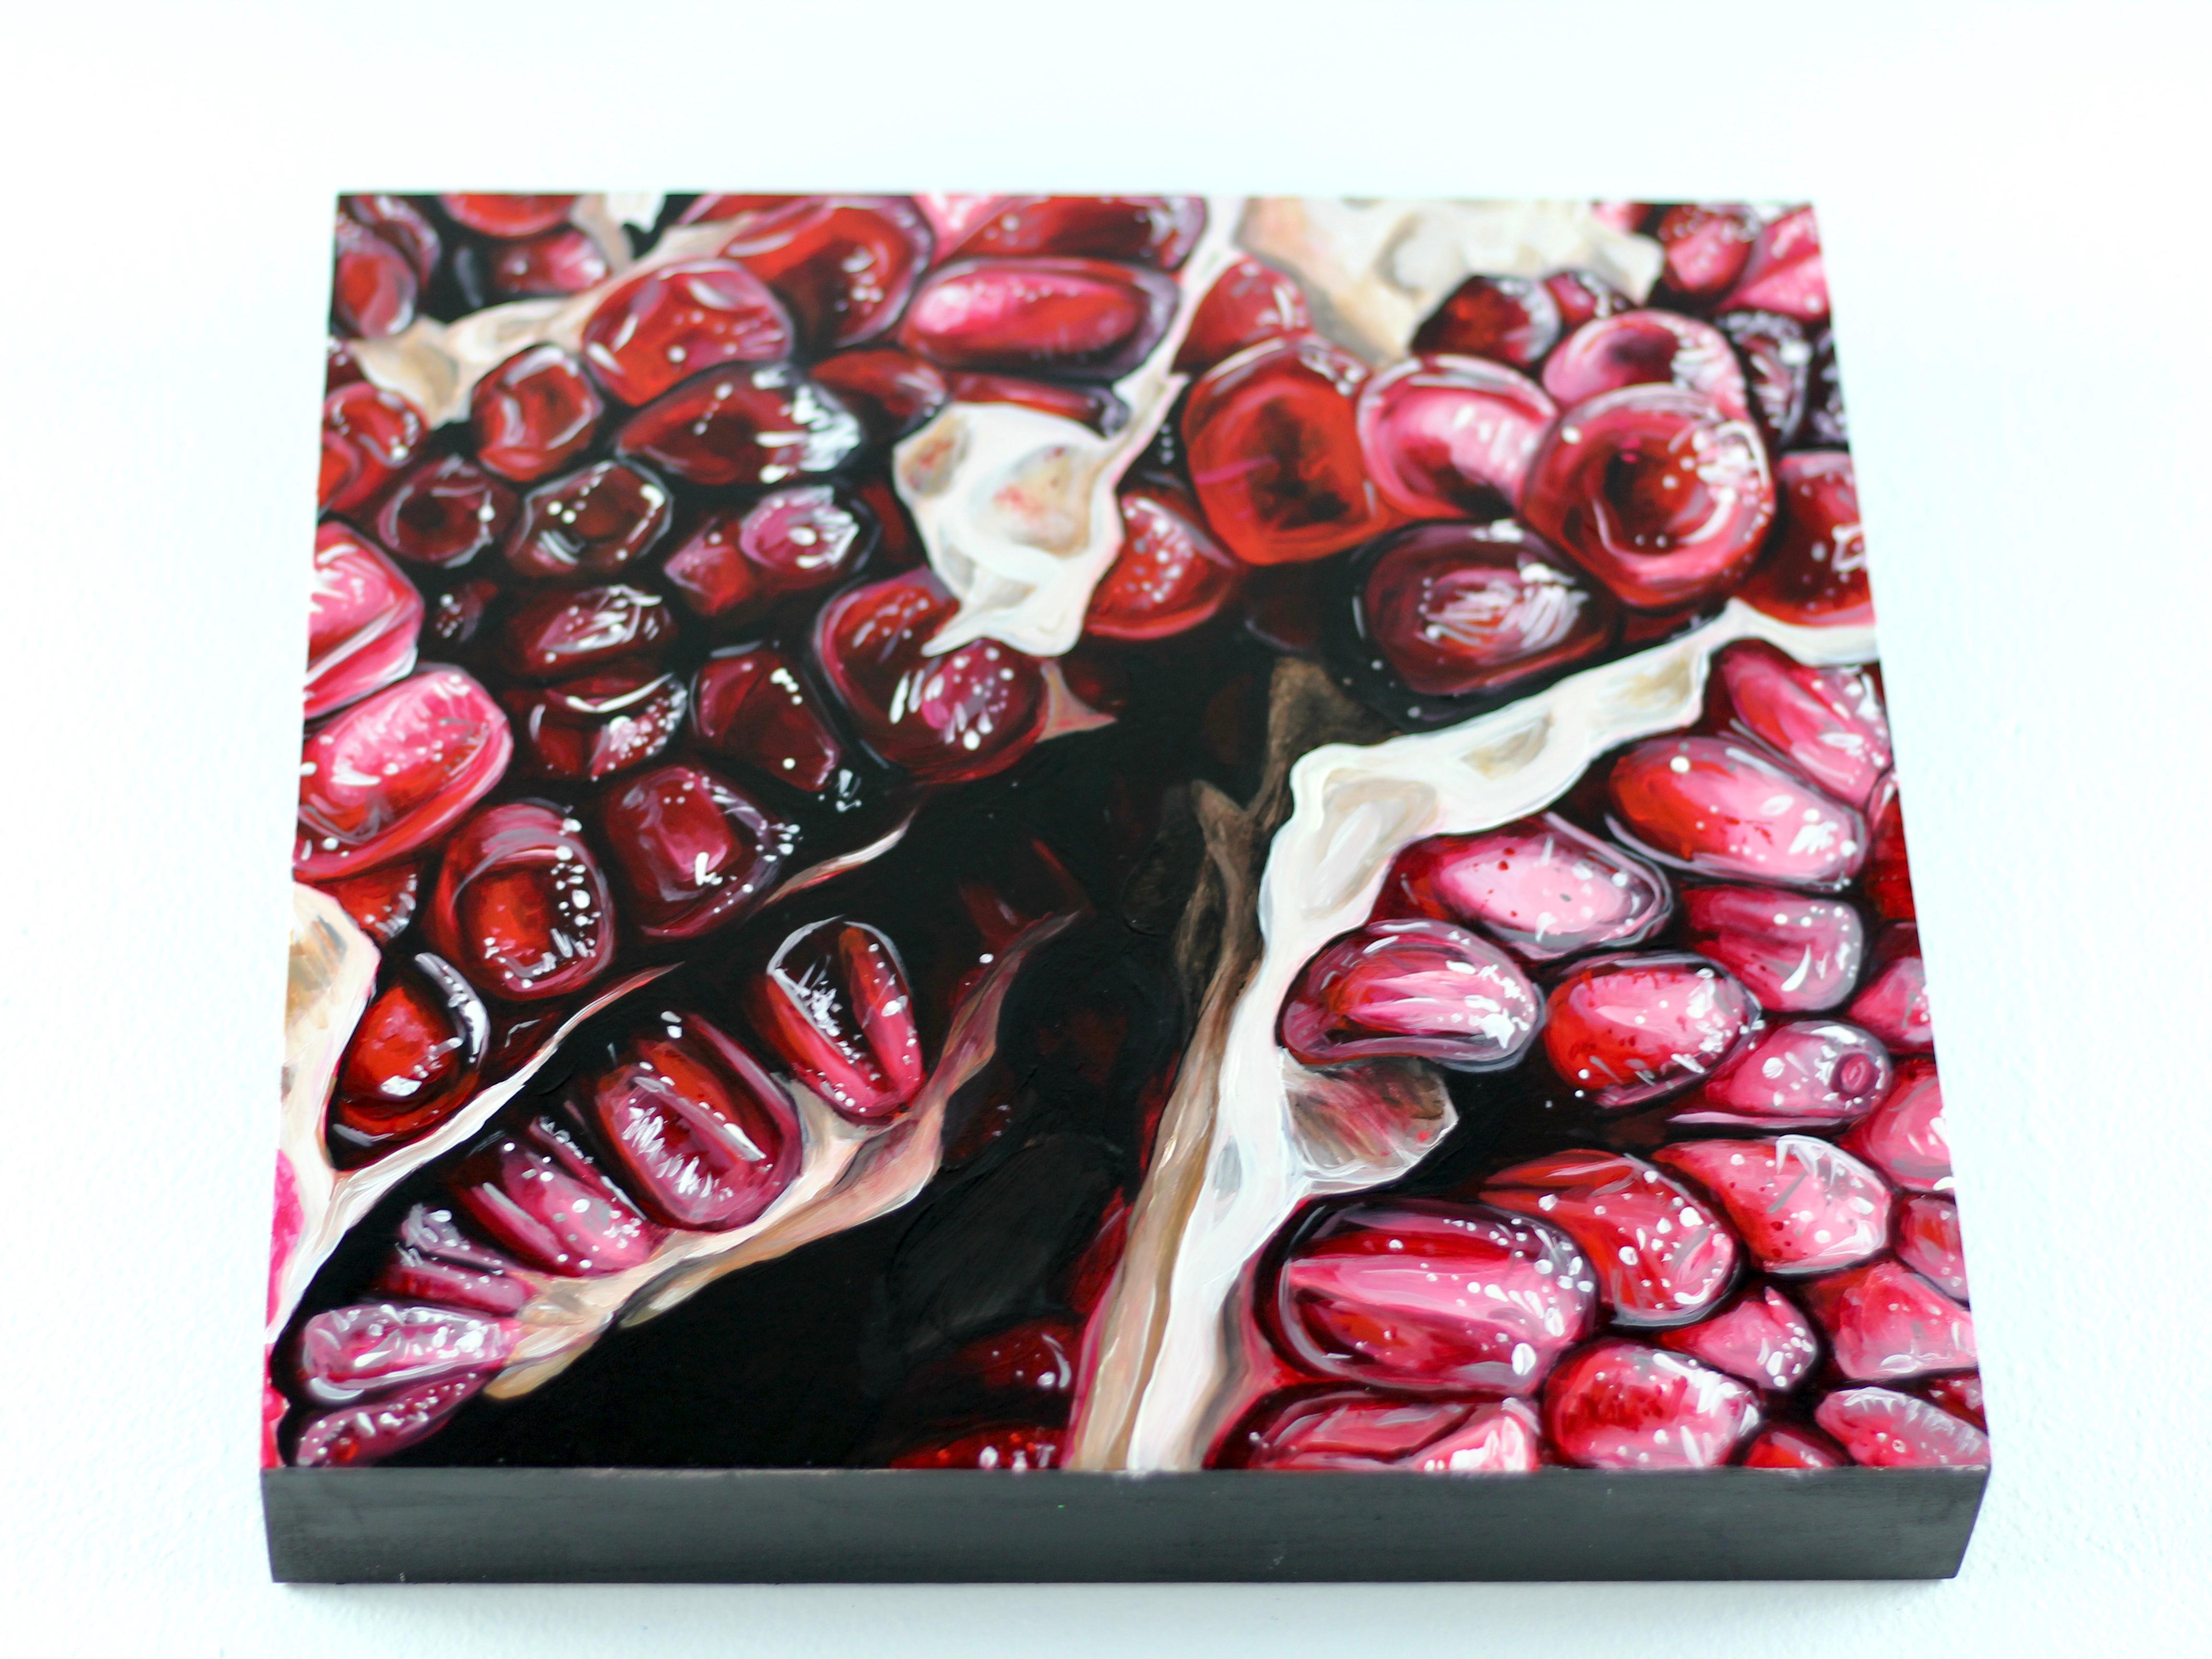 Pomegranate-original modern hyper realism still life painting-contemporary Art - Abstract Expressionist Painting by Angela Faustina